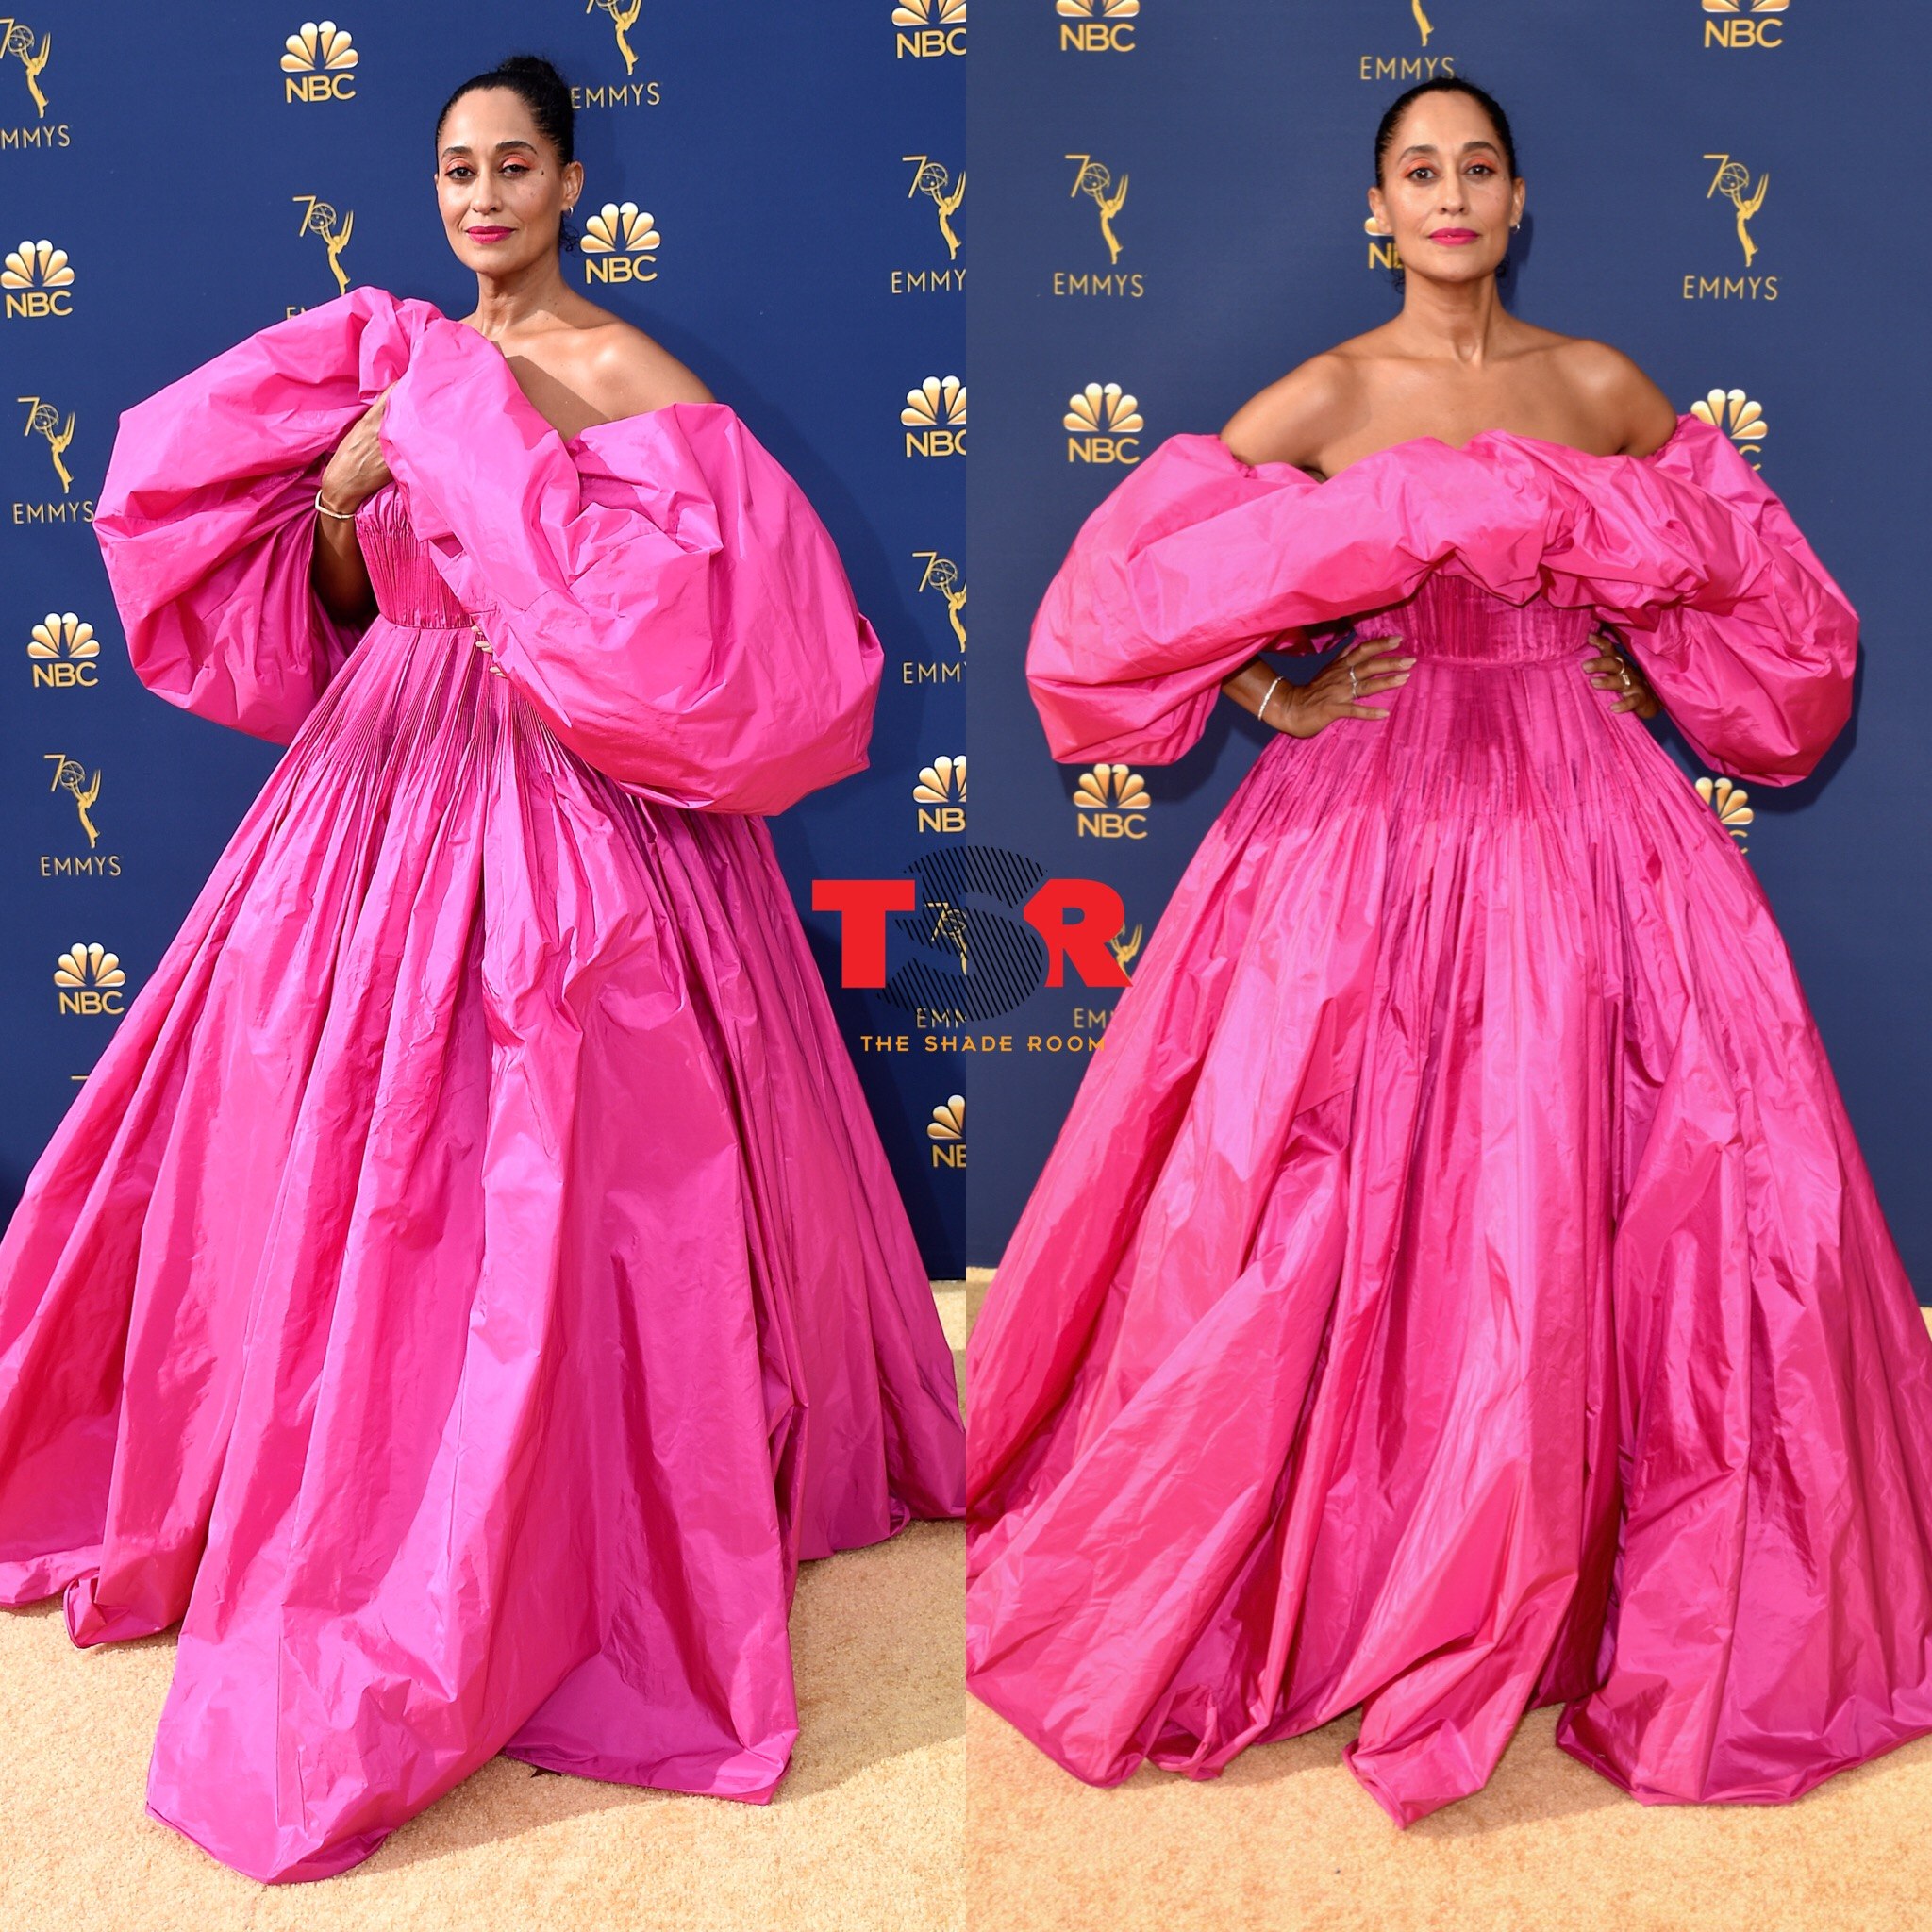 Celebs Step Out And Shut Down The Carpet At The 2018 Emmy Awards - The Shade Room